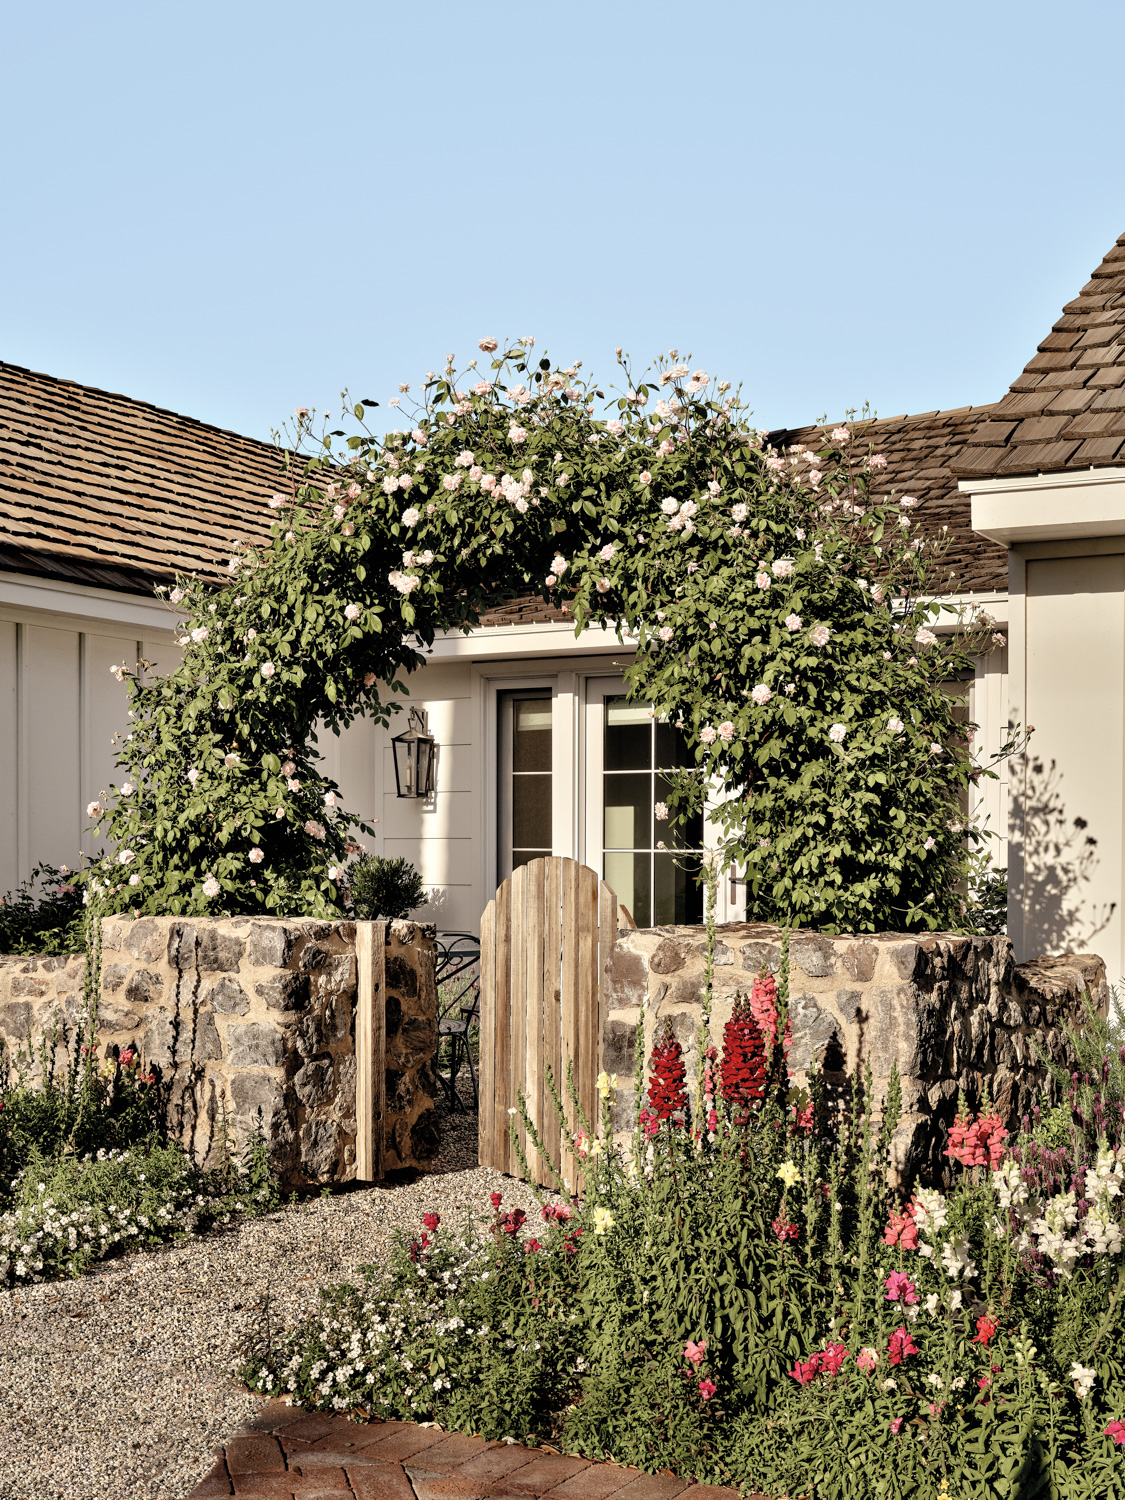 Pink Iceberg roses cover an archway at the entry gate of an English countryside-inspired cottage